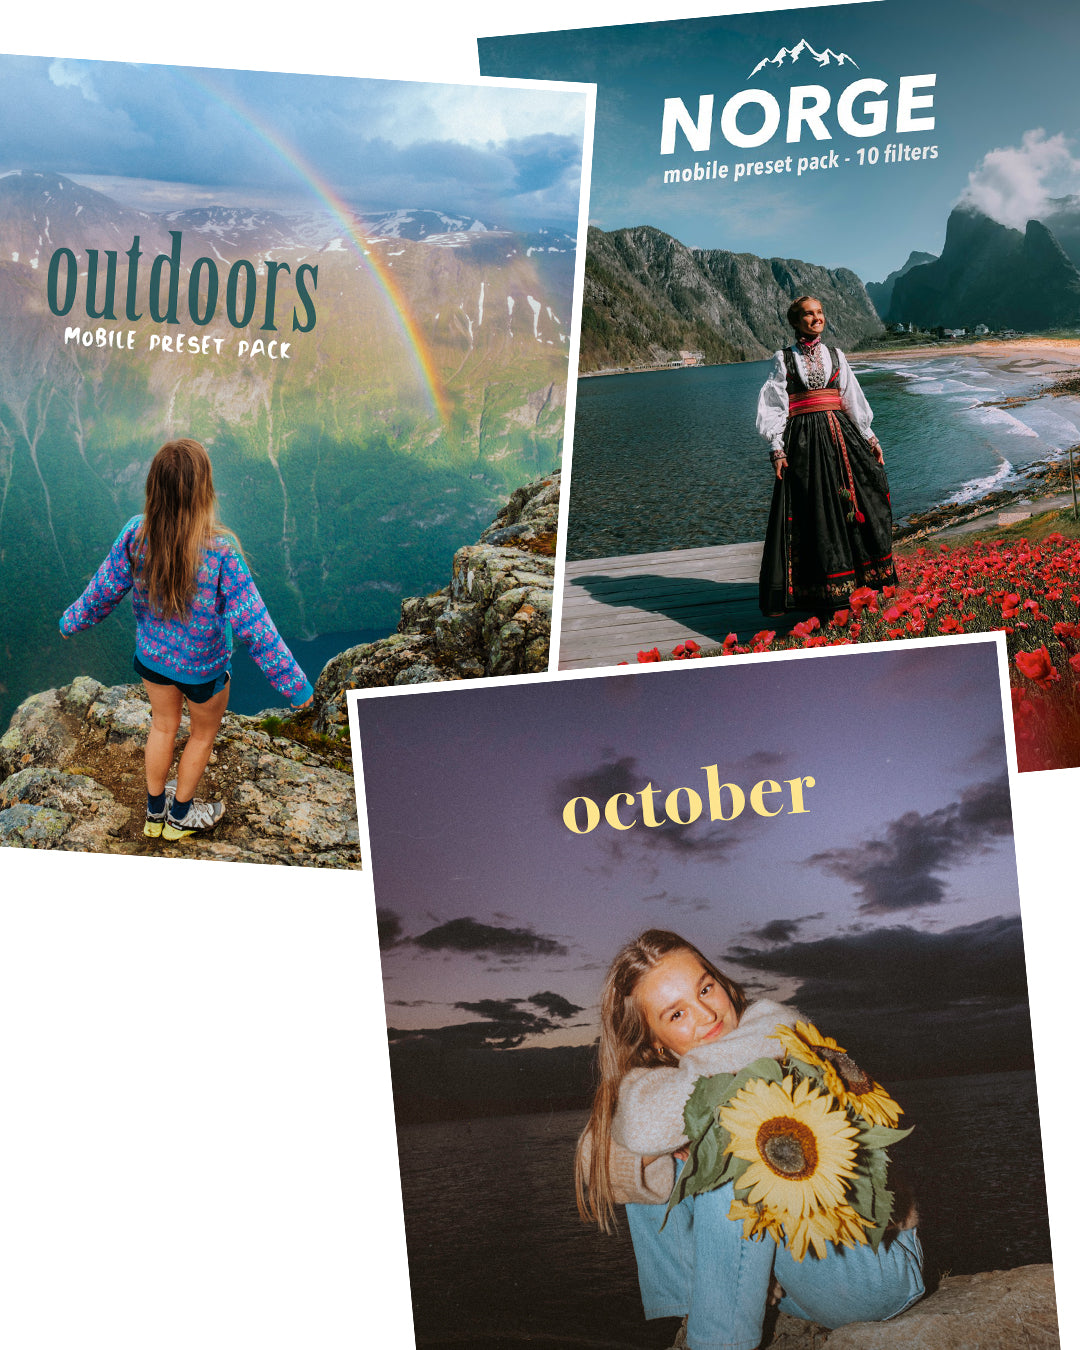 3 in 1: Outdoors + Norge + October